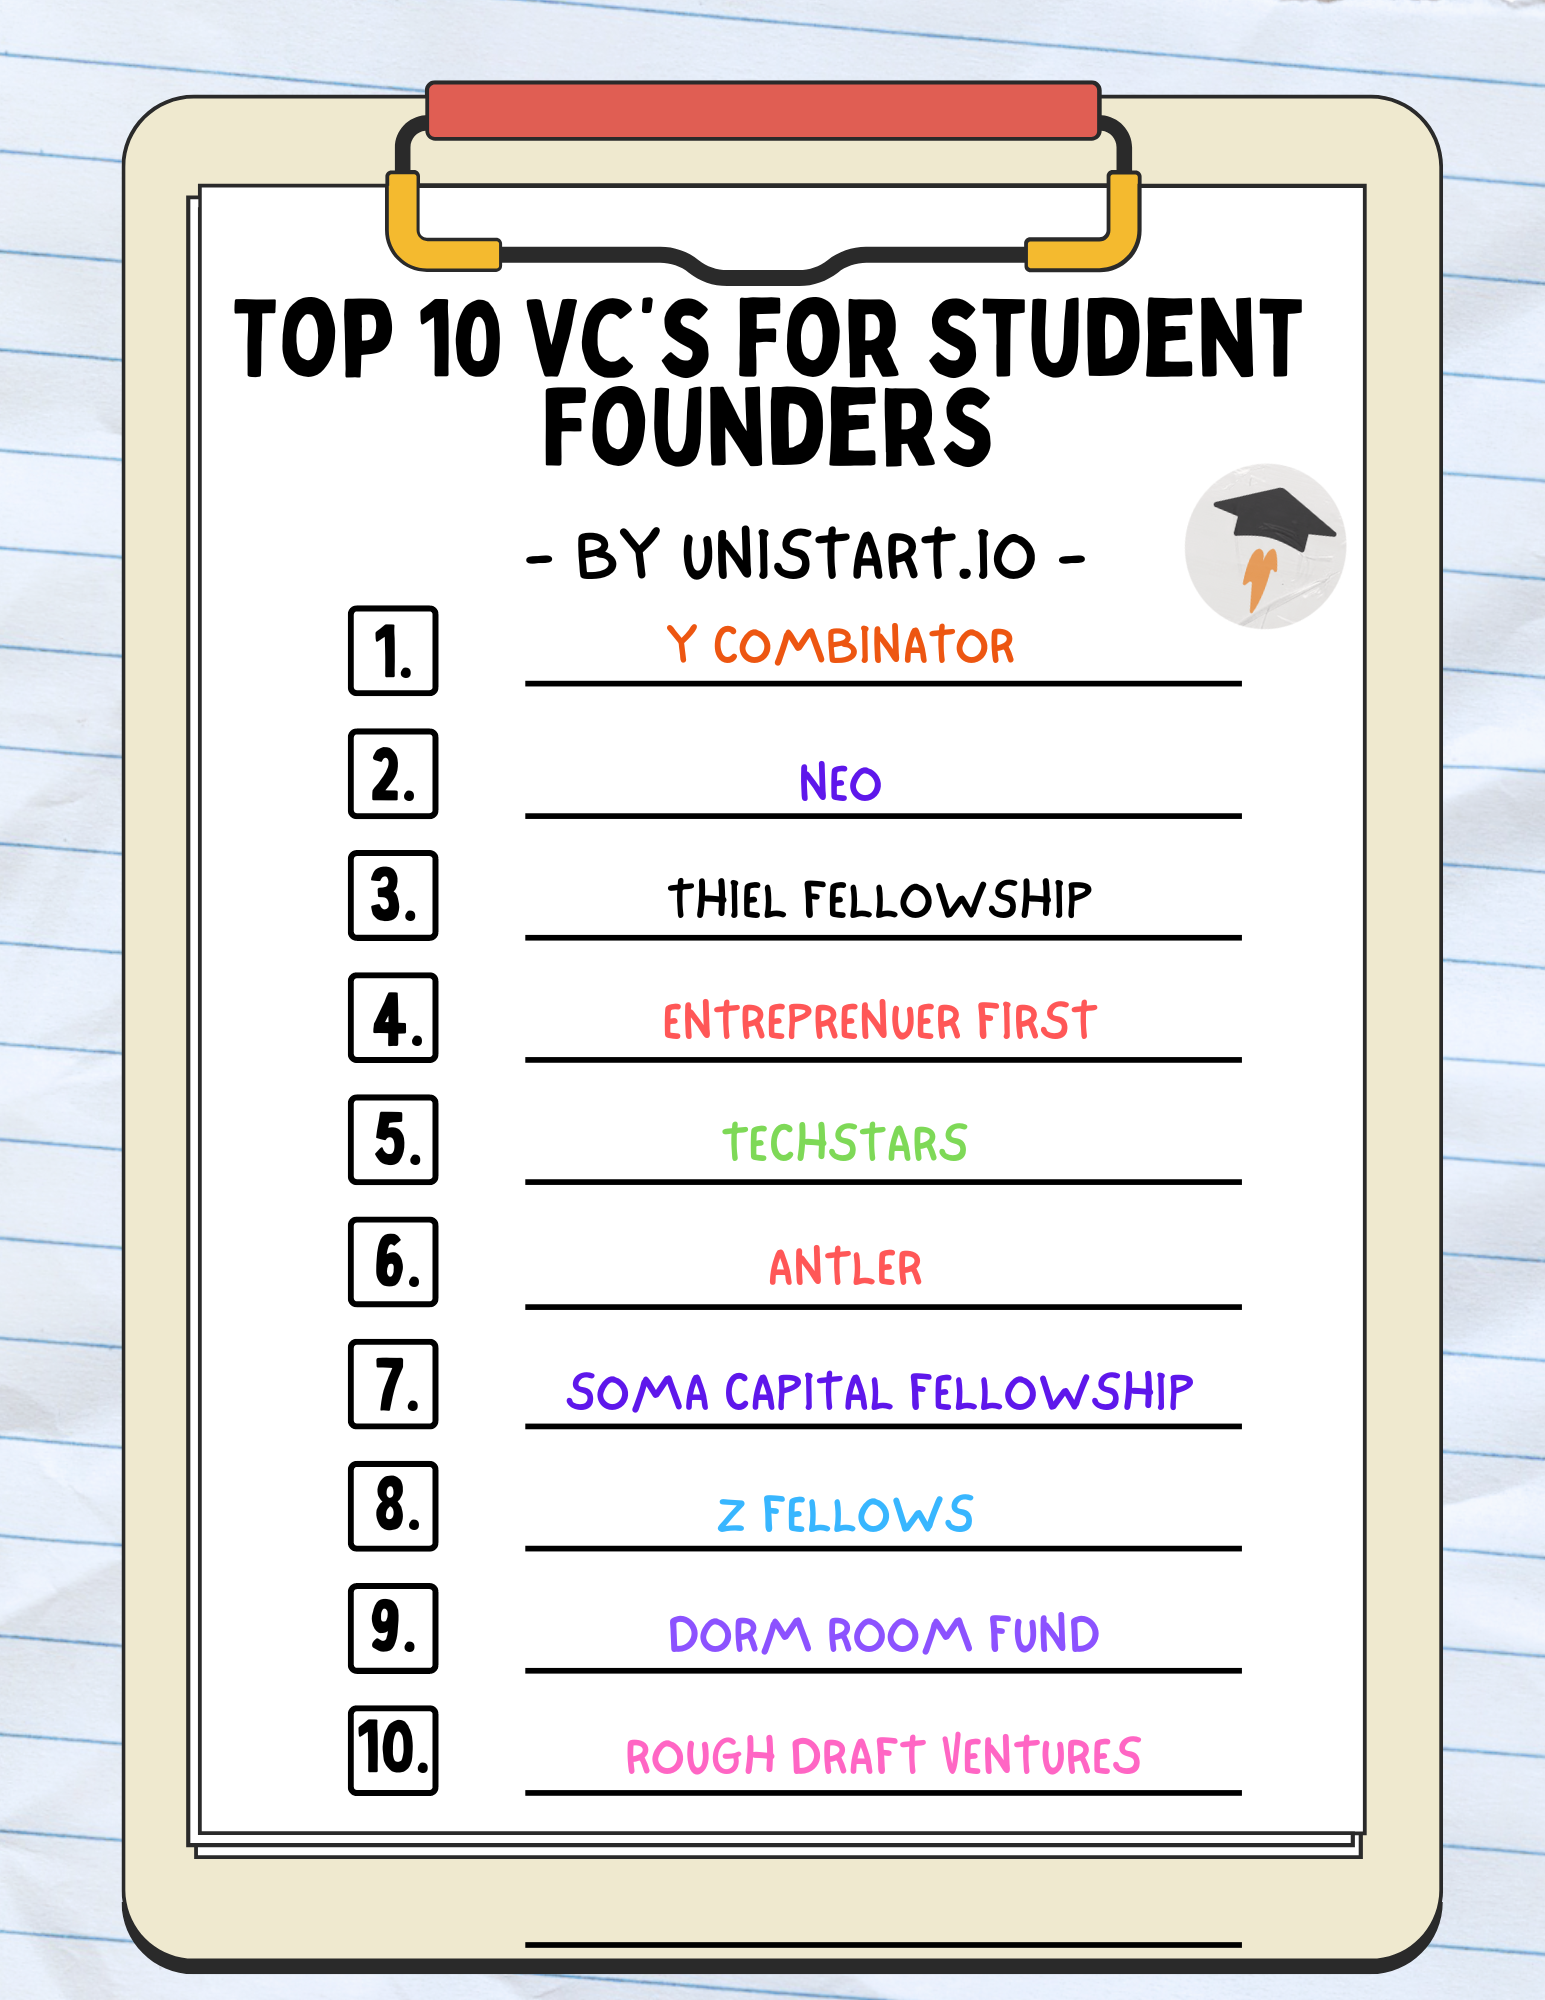 Top 10 VCs for Student Founders 